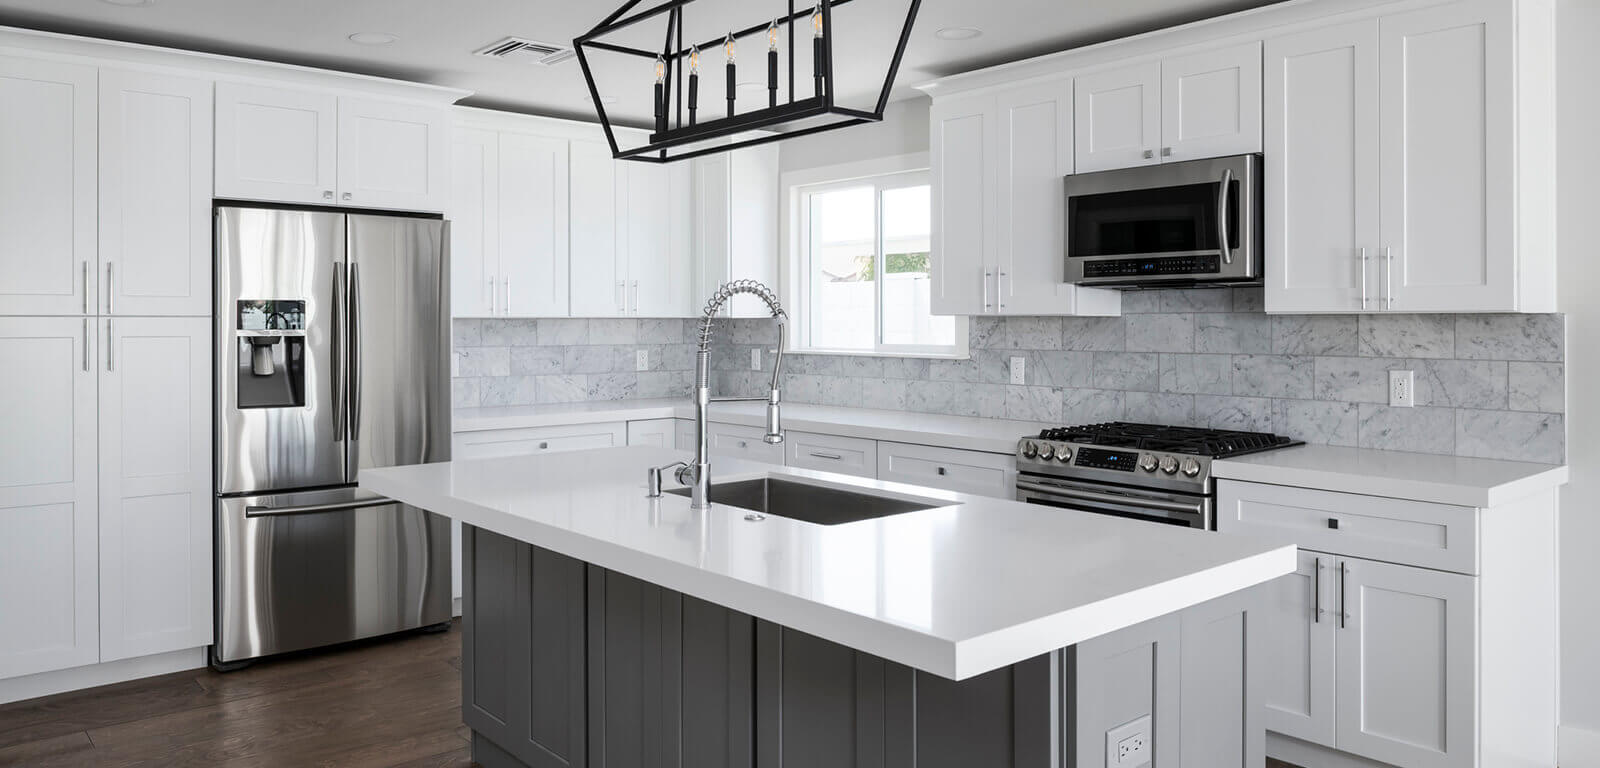 Kitchen Remodeling by Concept Bath Systems, Inc.